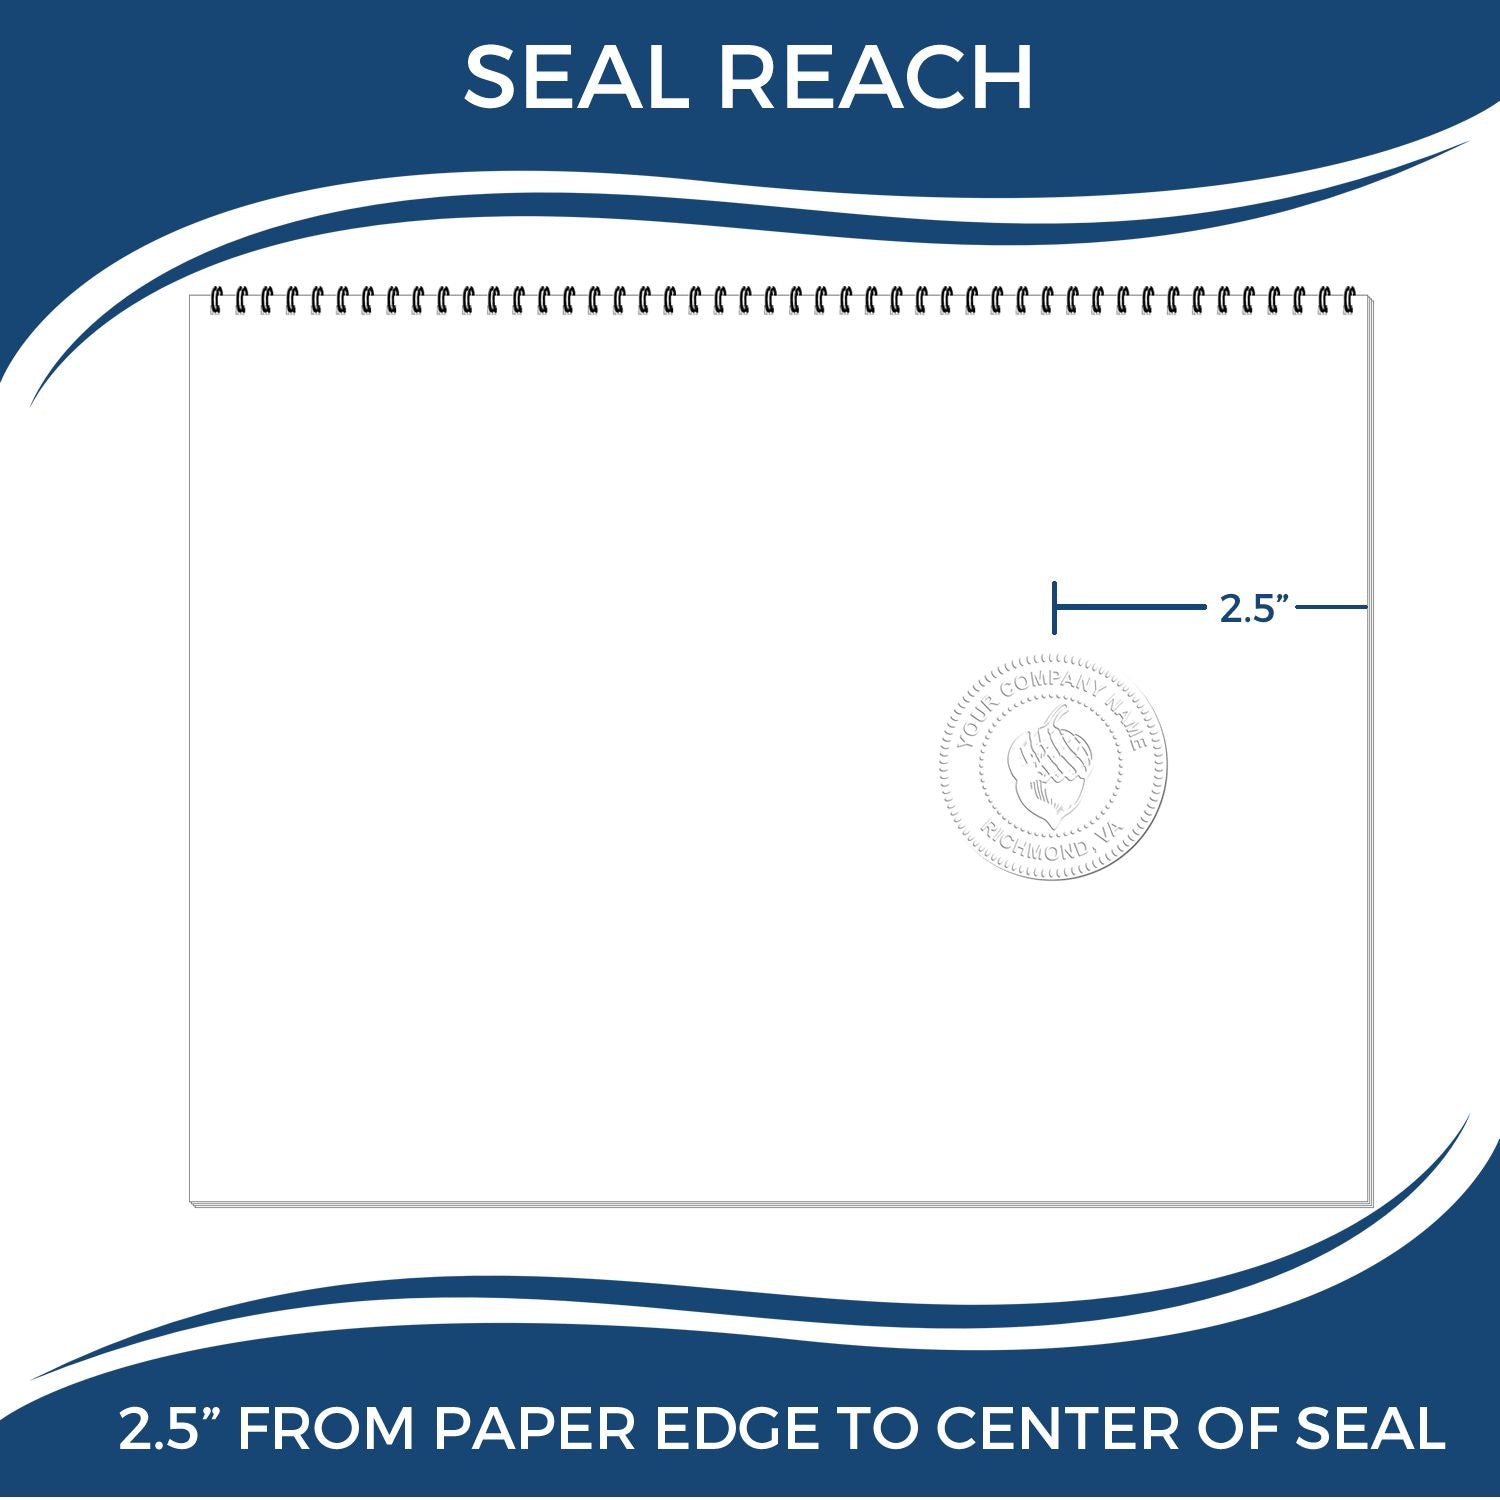 An infographic showing the seal reach which is represented by a ruler and a miniature seal image of the Heavy Duty Cast Iron New York Engineer Seal Embosser